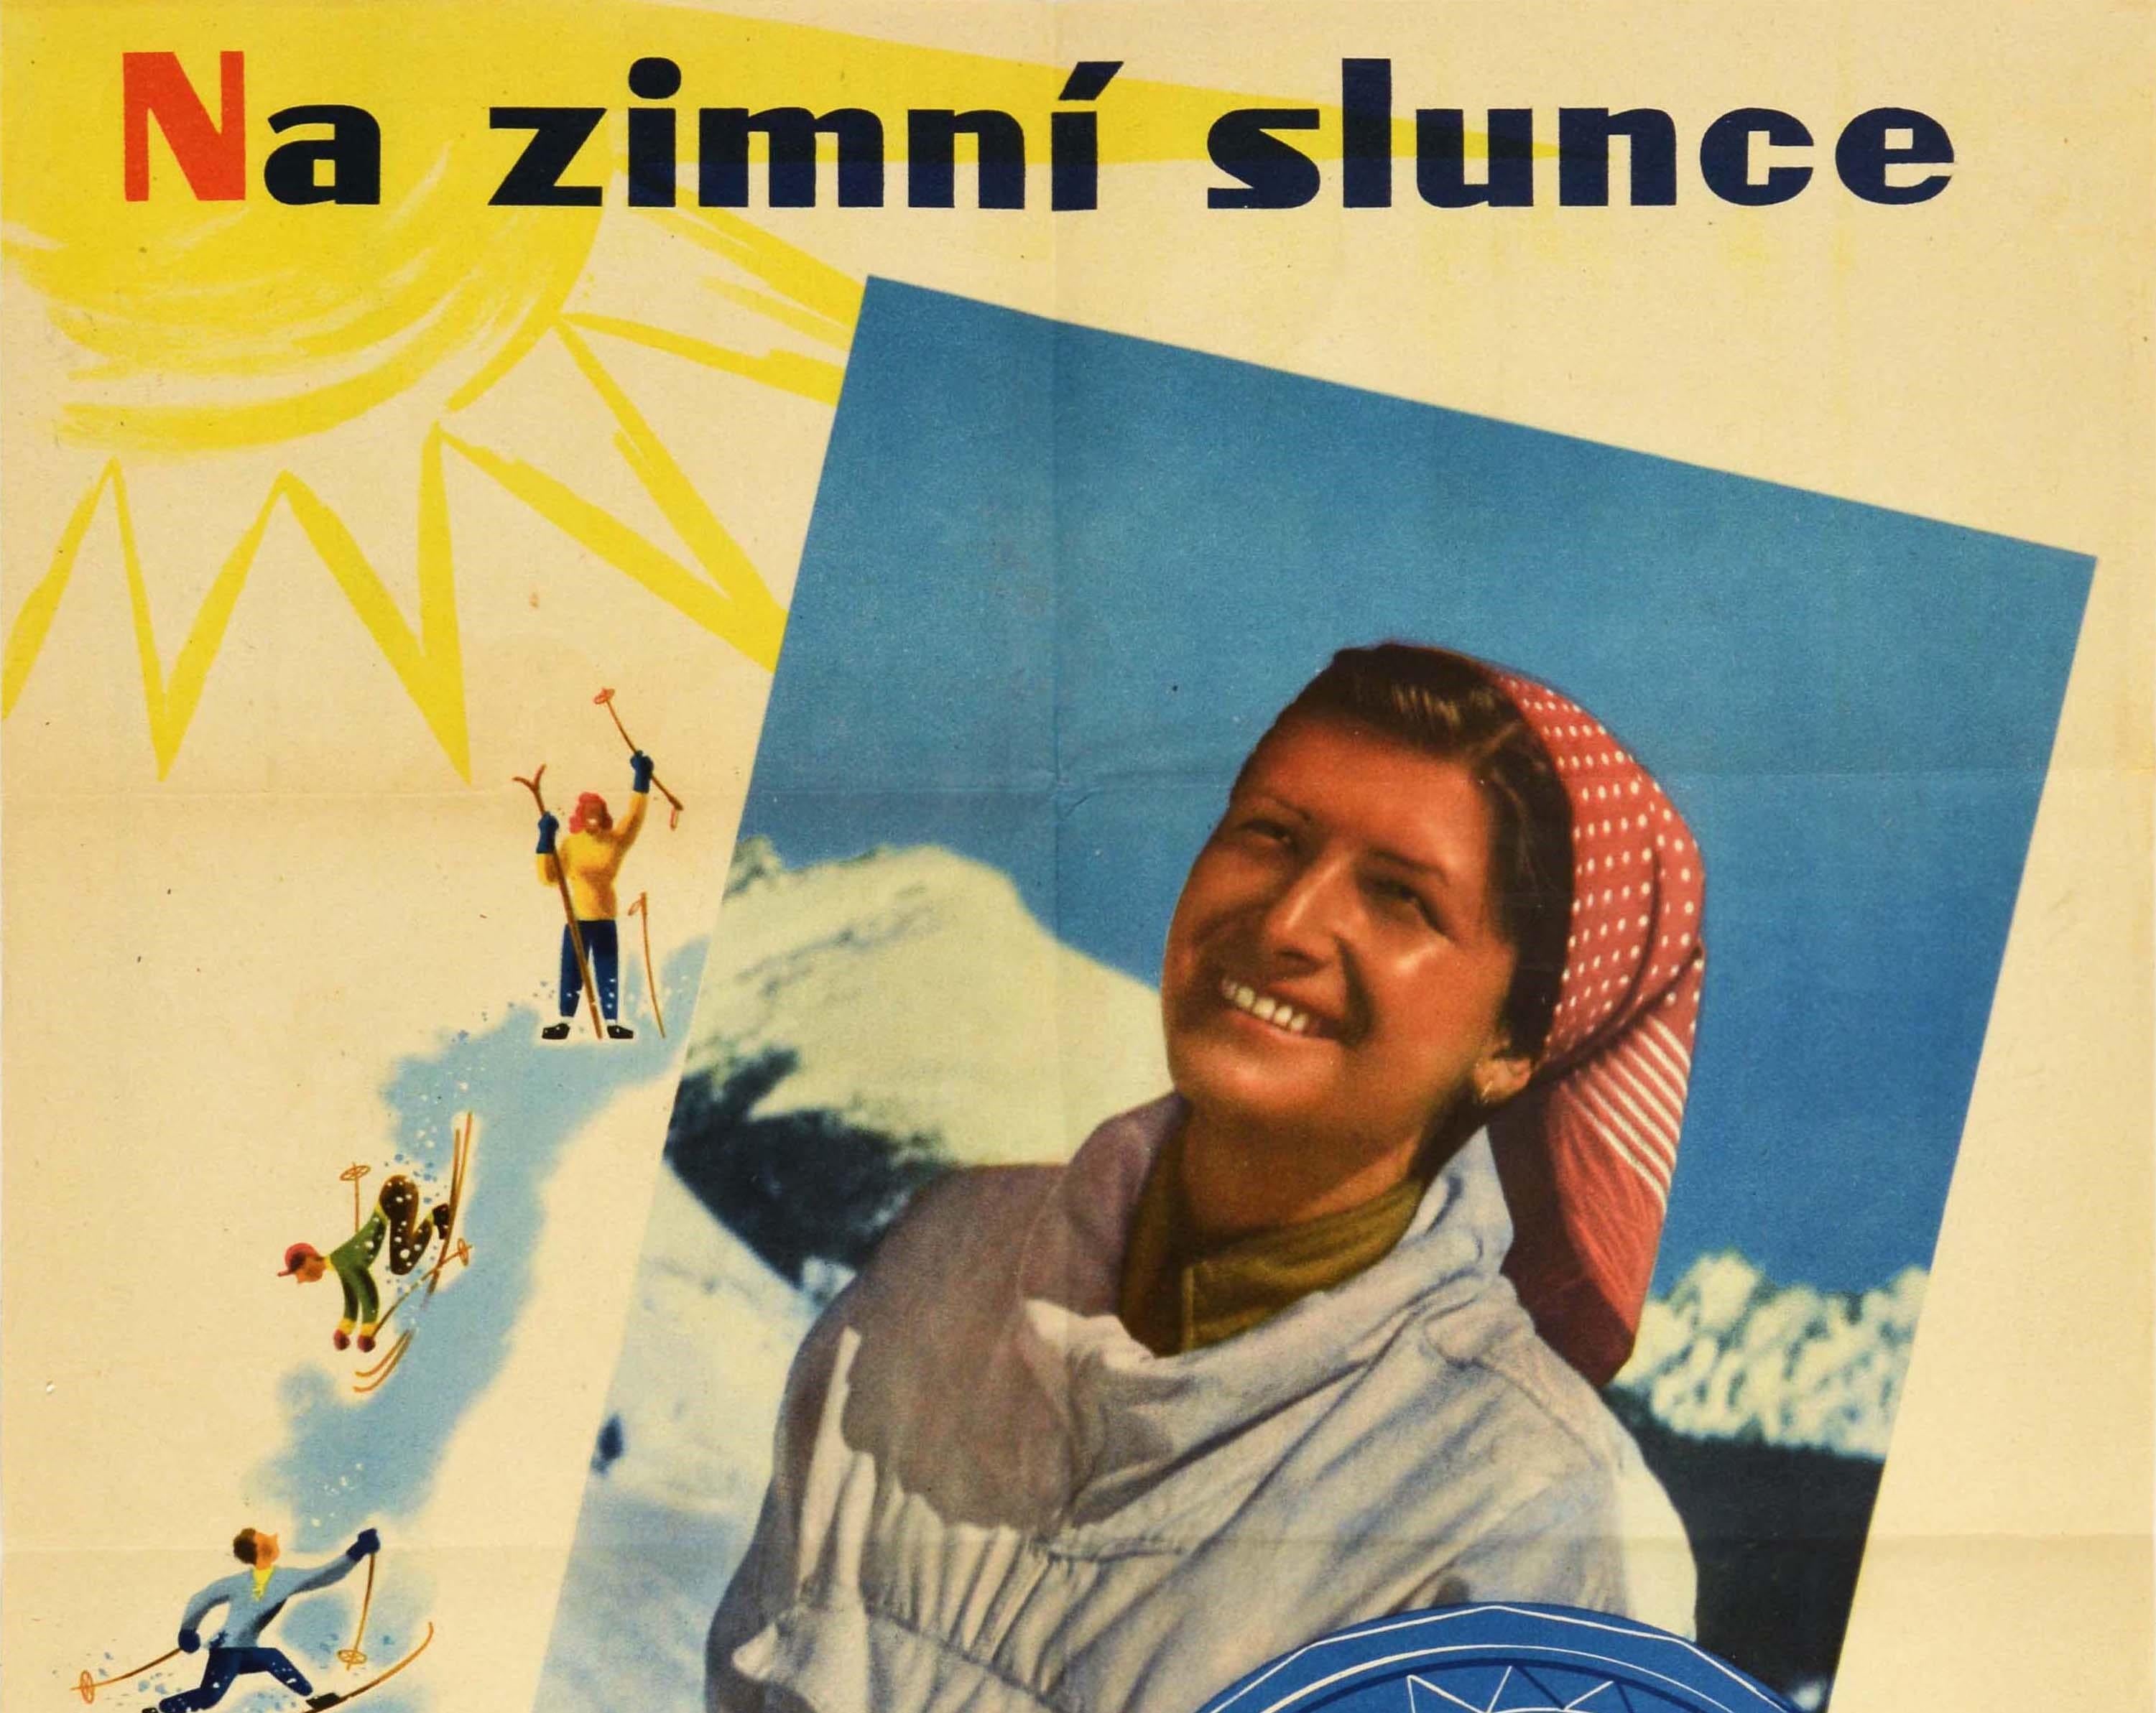 Original vintage advertising poster for Jadran sun cream - In the winter sun Jadran with burn protection filter / Na zimni slunce Jadran s ochrannym filtrem proti spaleninam - featuring a great design with a photo of a smiling lady wearing a